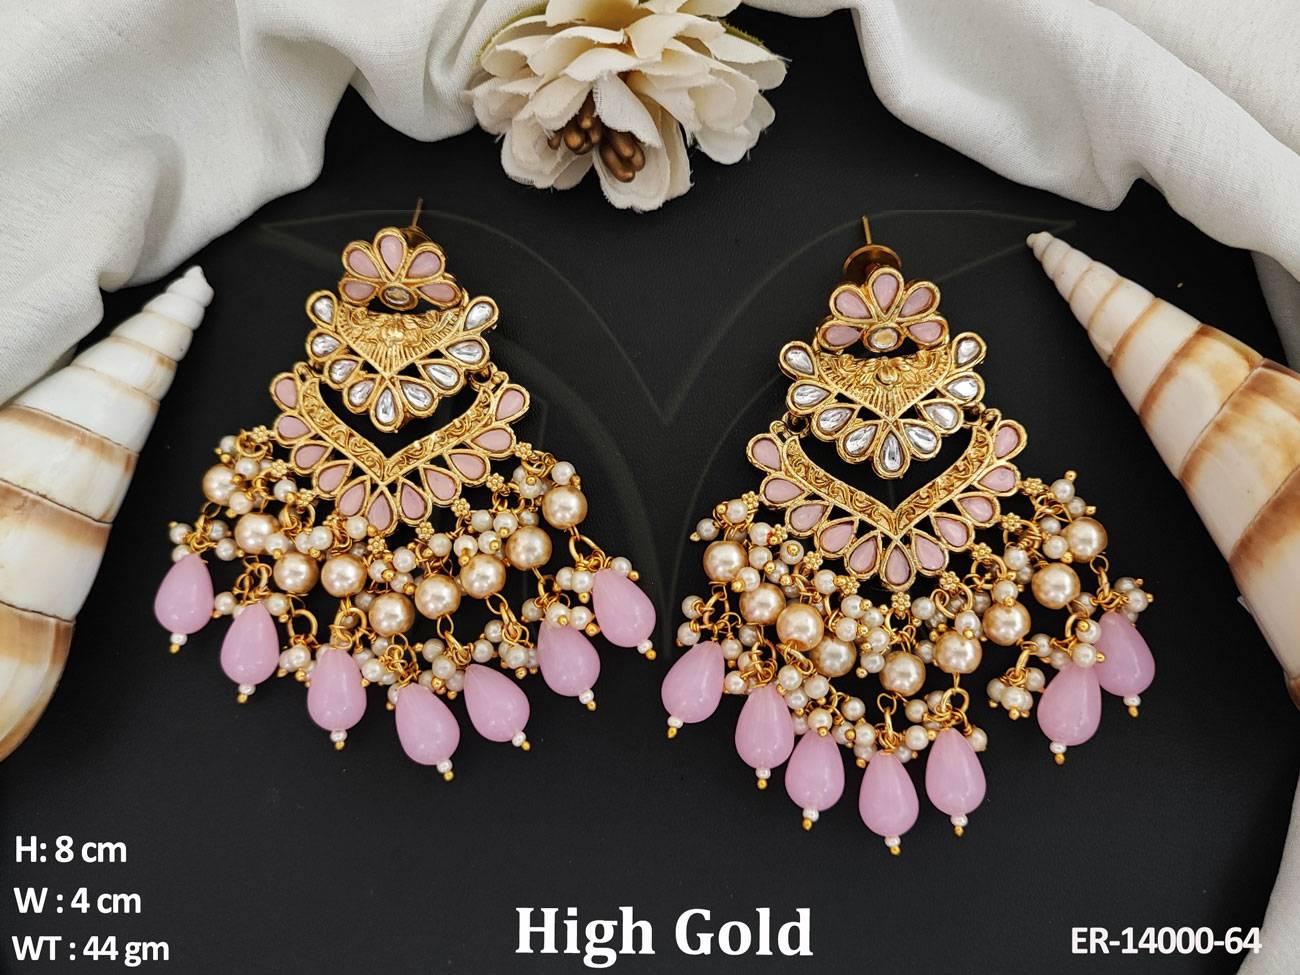 Expertly crafted with High Gold Polish, these Antique Dangler Earrings are the perfect addition to any party wear ensemble.